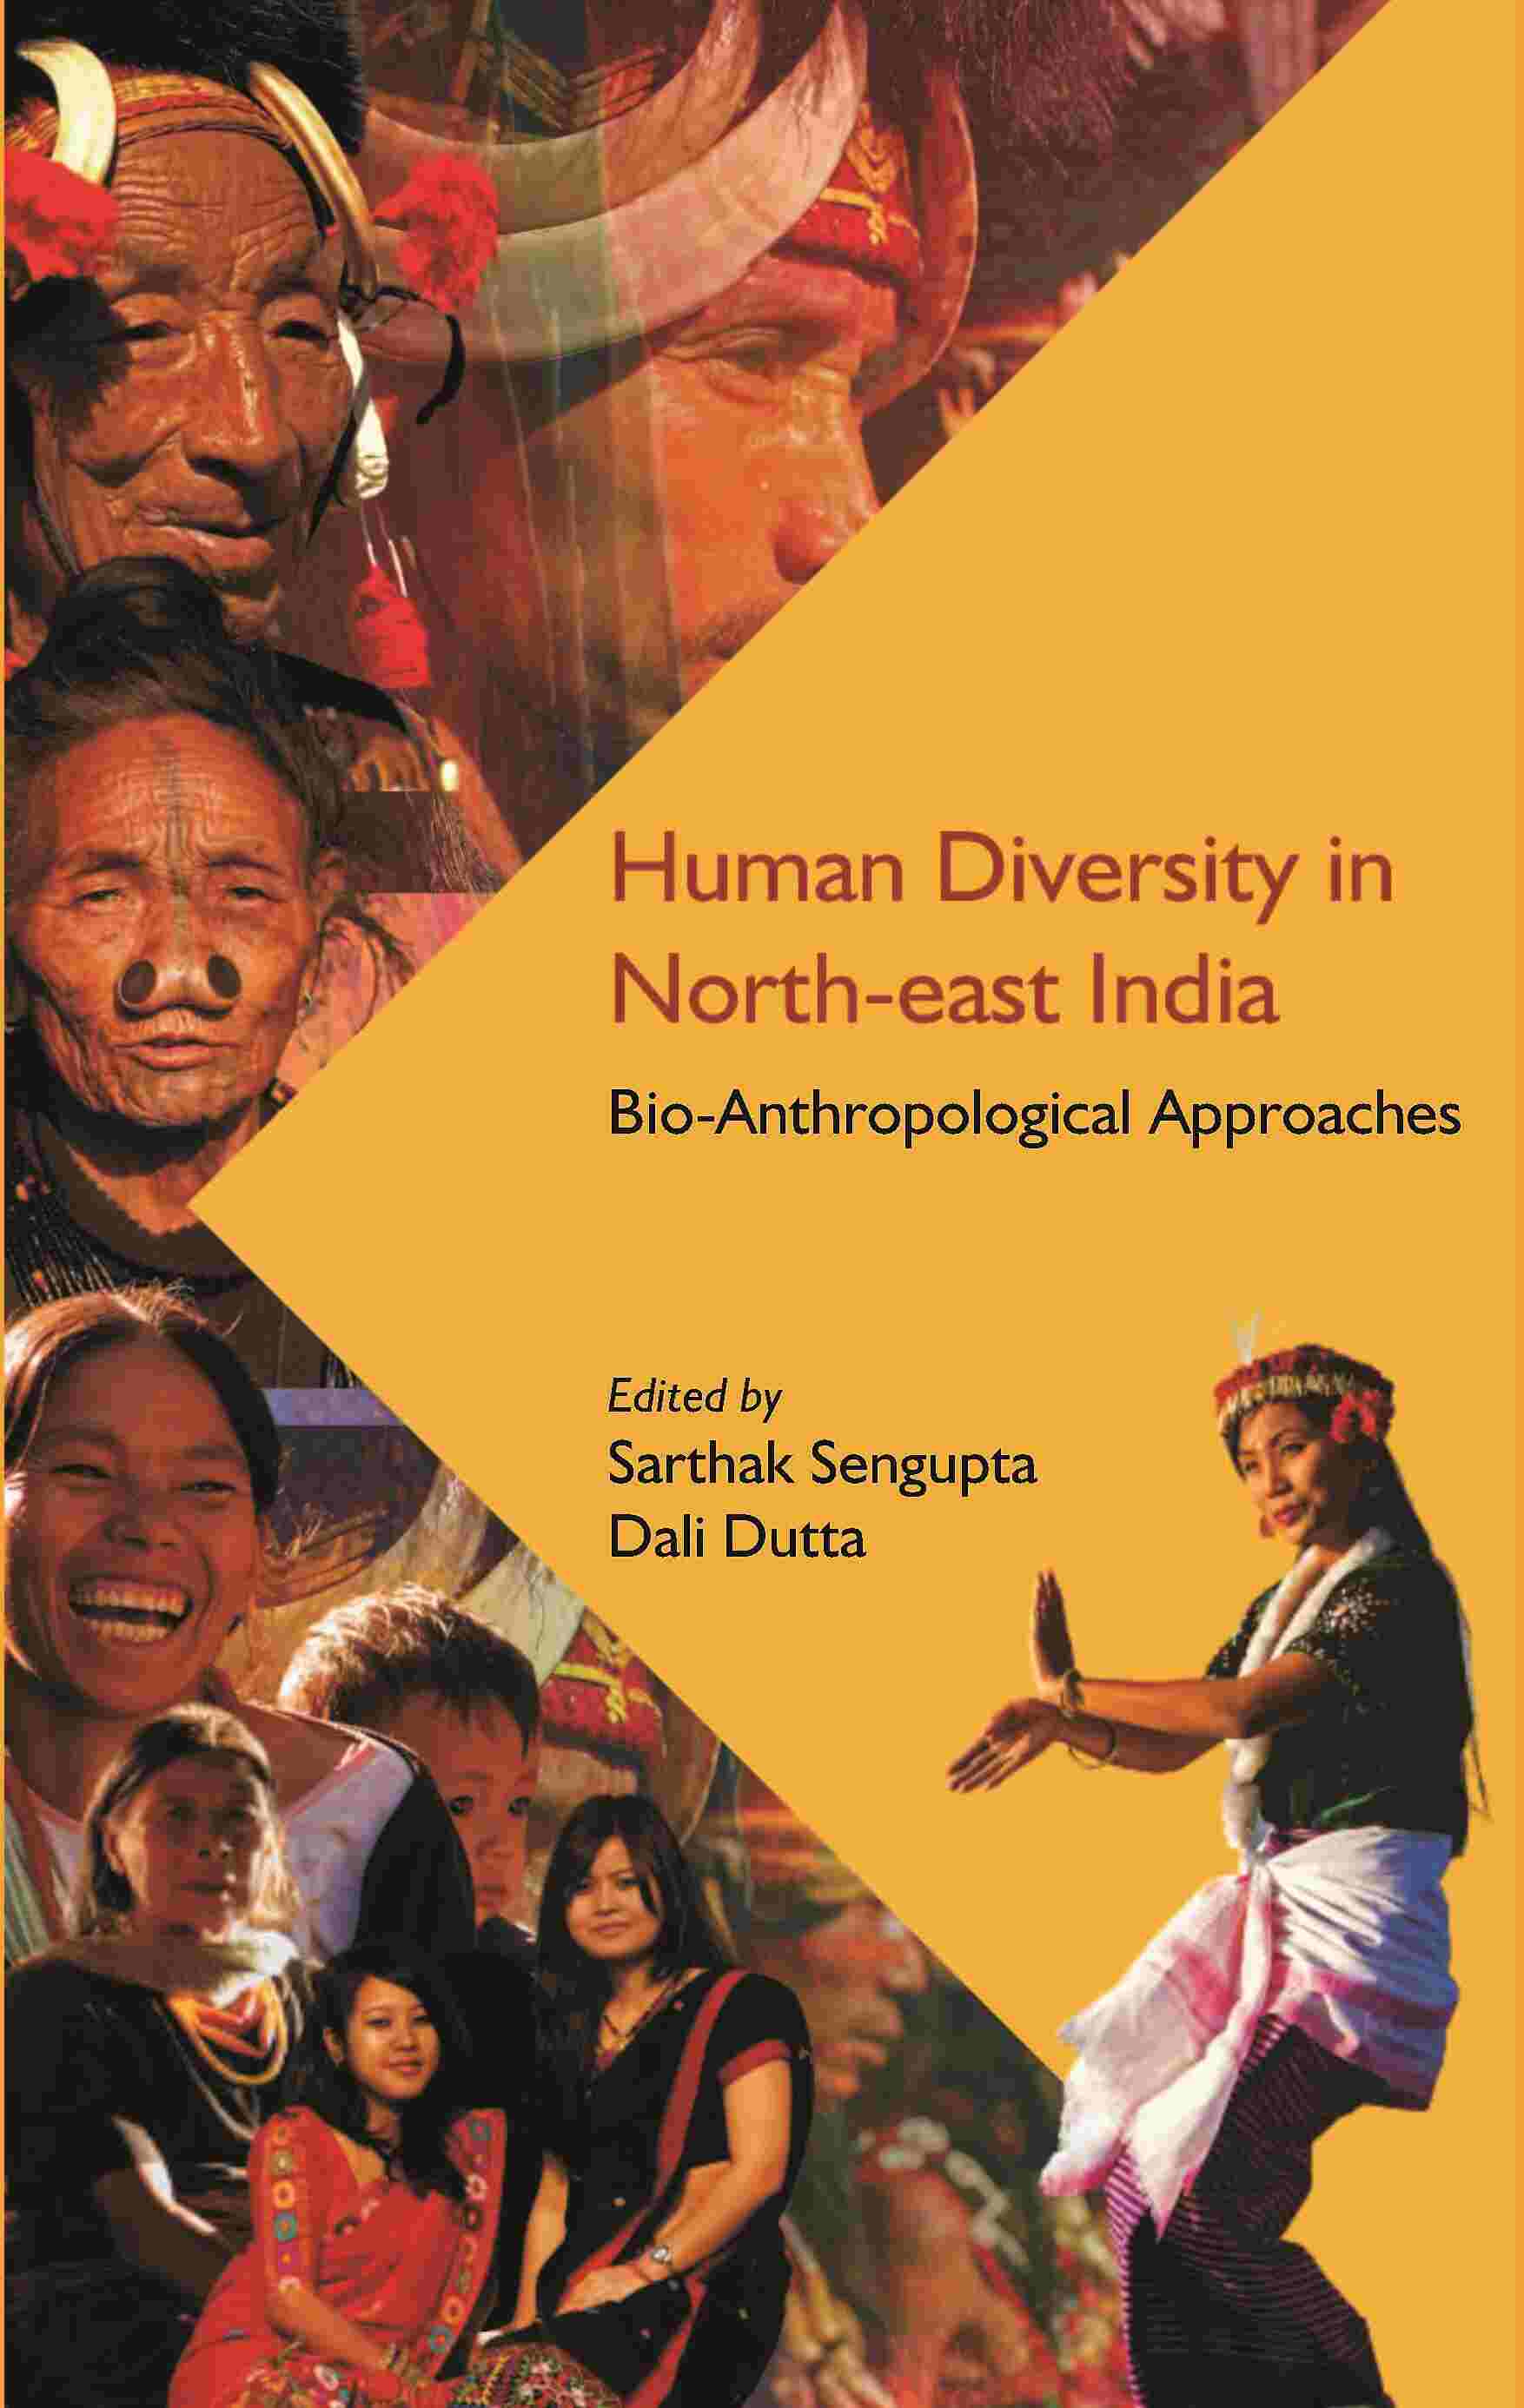 Human Diversity in North-east India: Bio-Anthropological Approaches